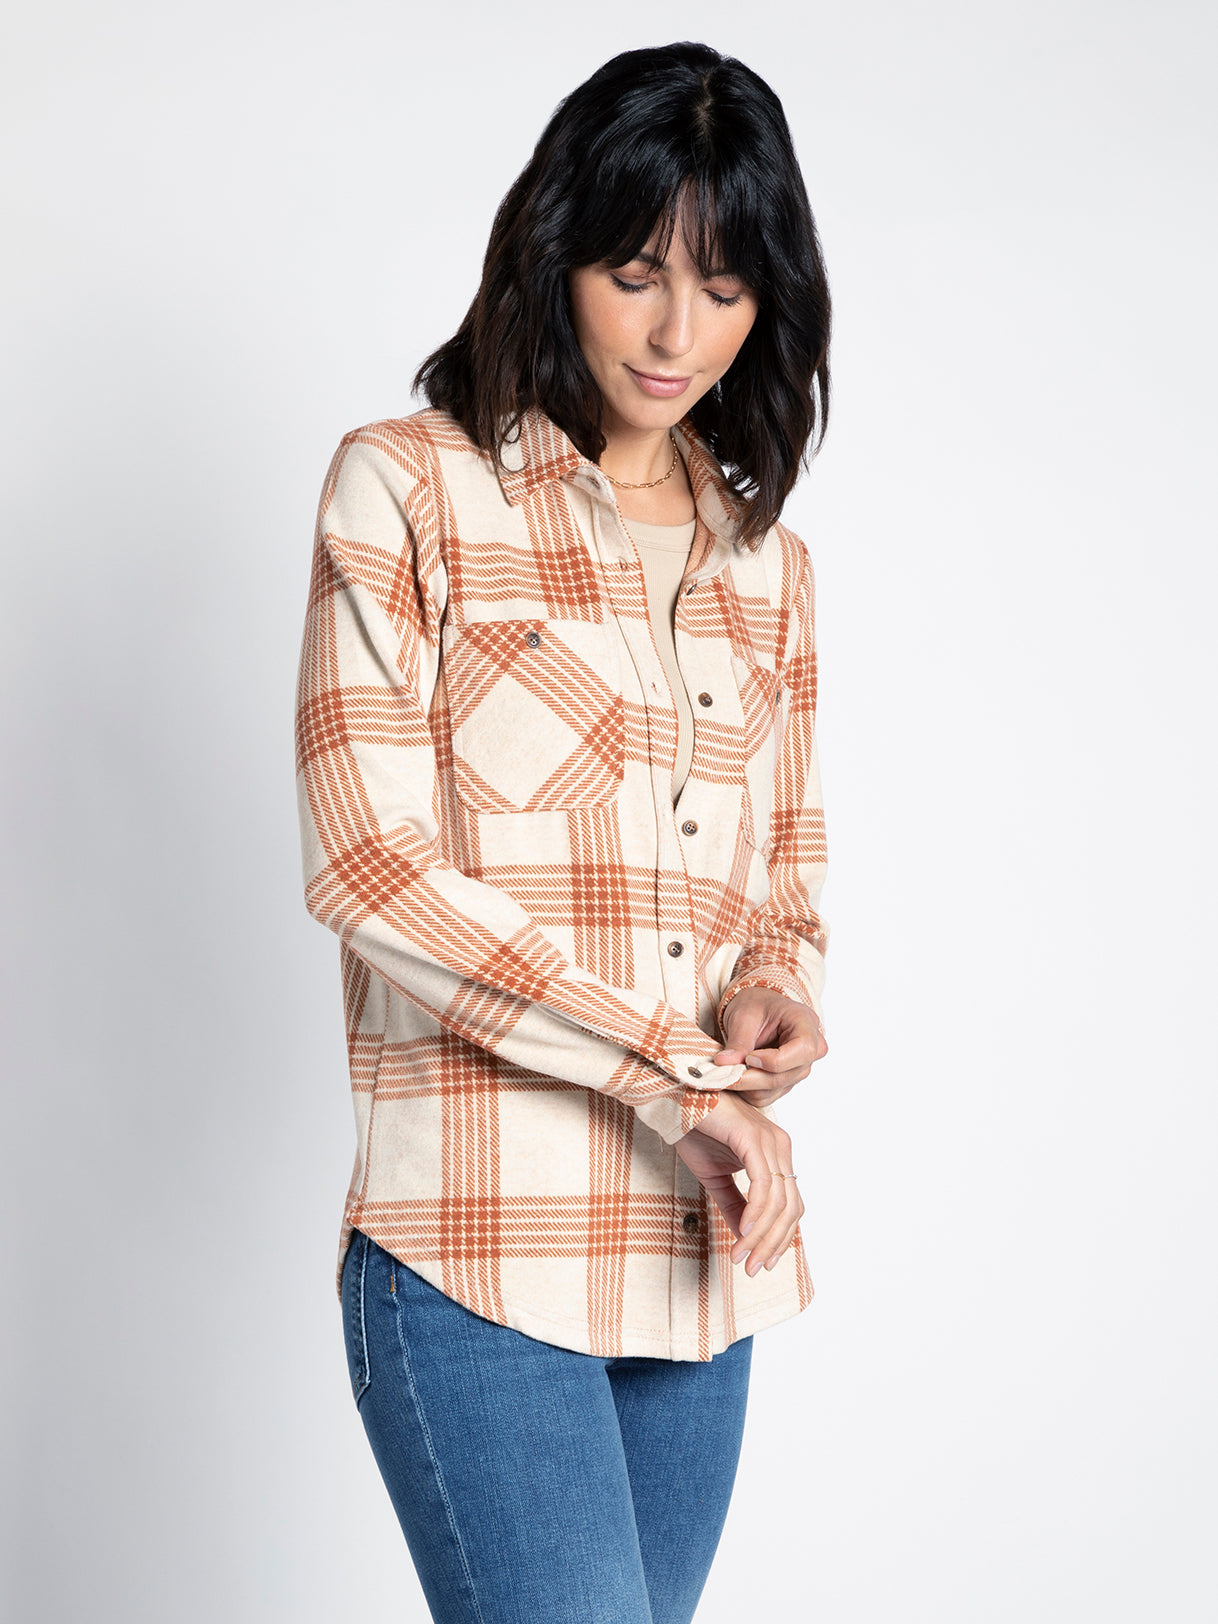 Thread & Supply Lewis Button Up Shirt for Women in Ivory Plaid